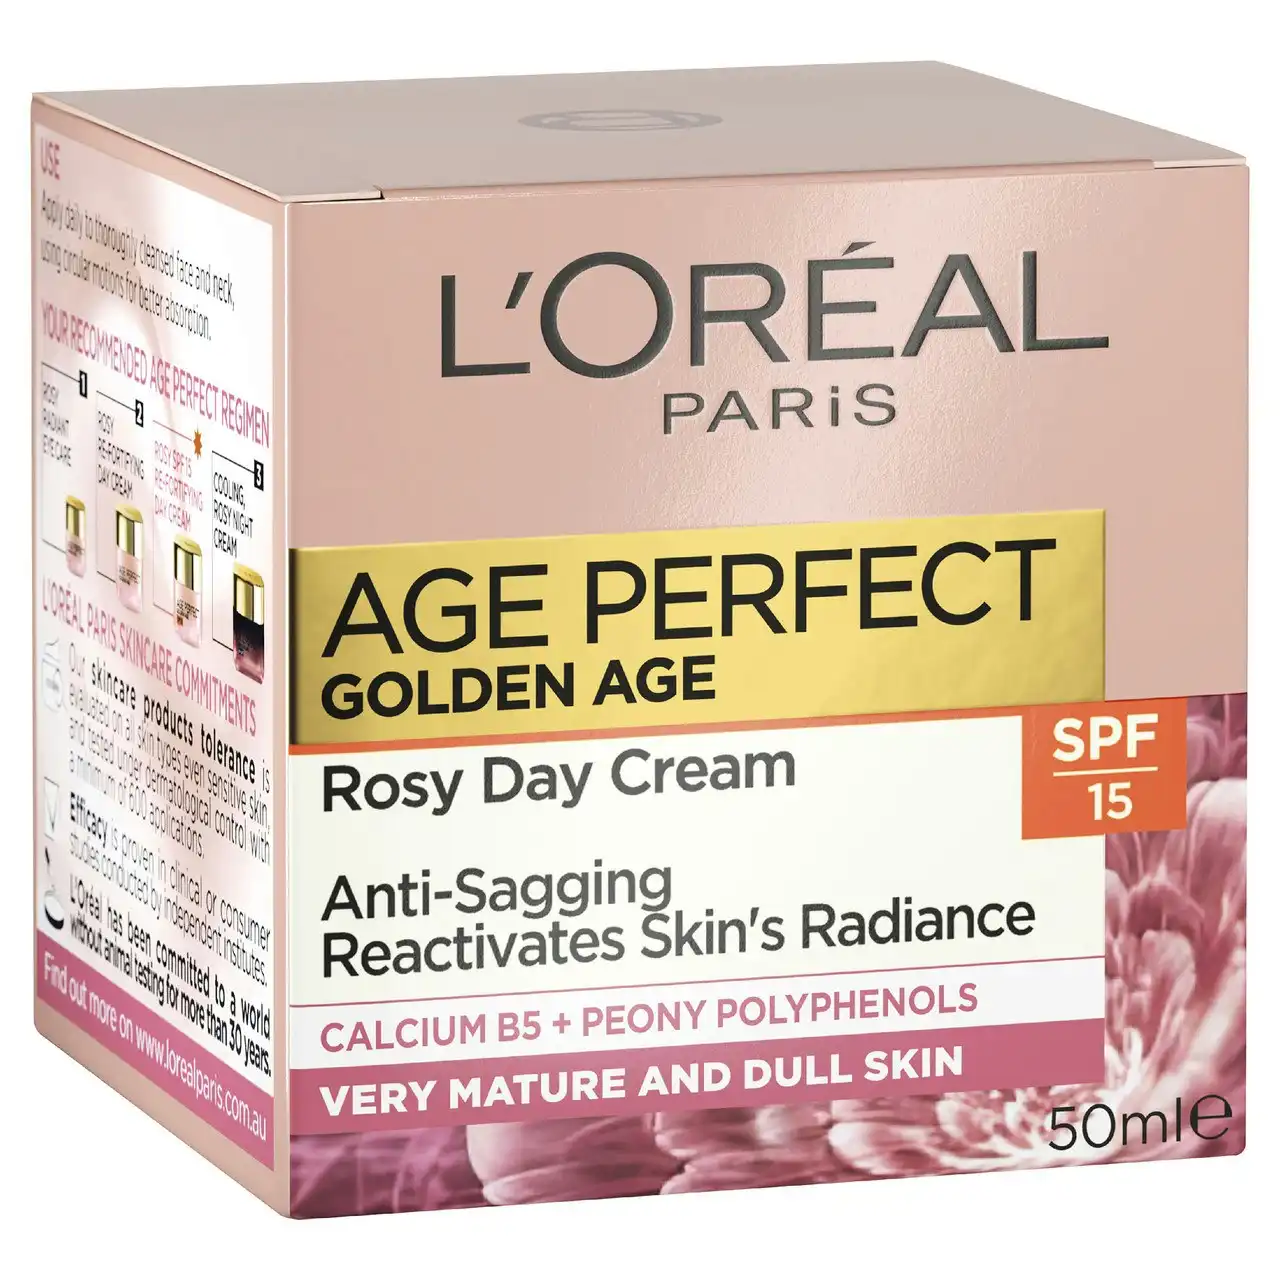 L'Oreal Paris Age Perfect Golden Age Re-Densifying SPF15 Day Cream